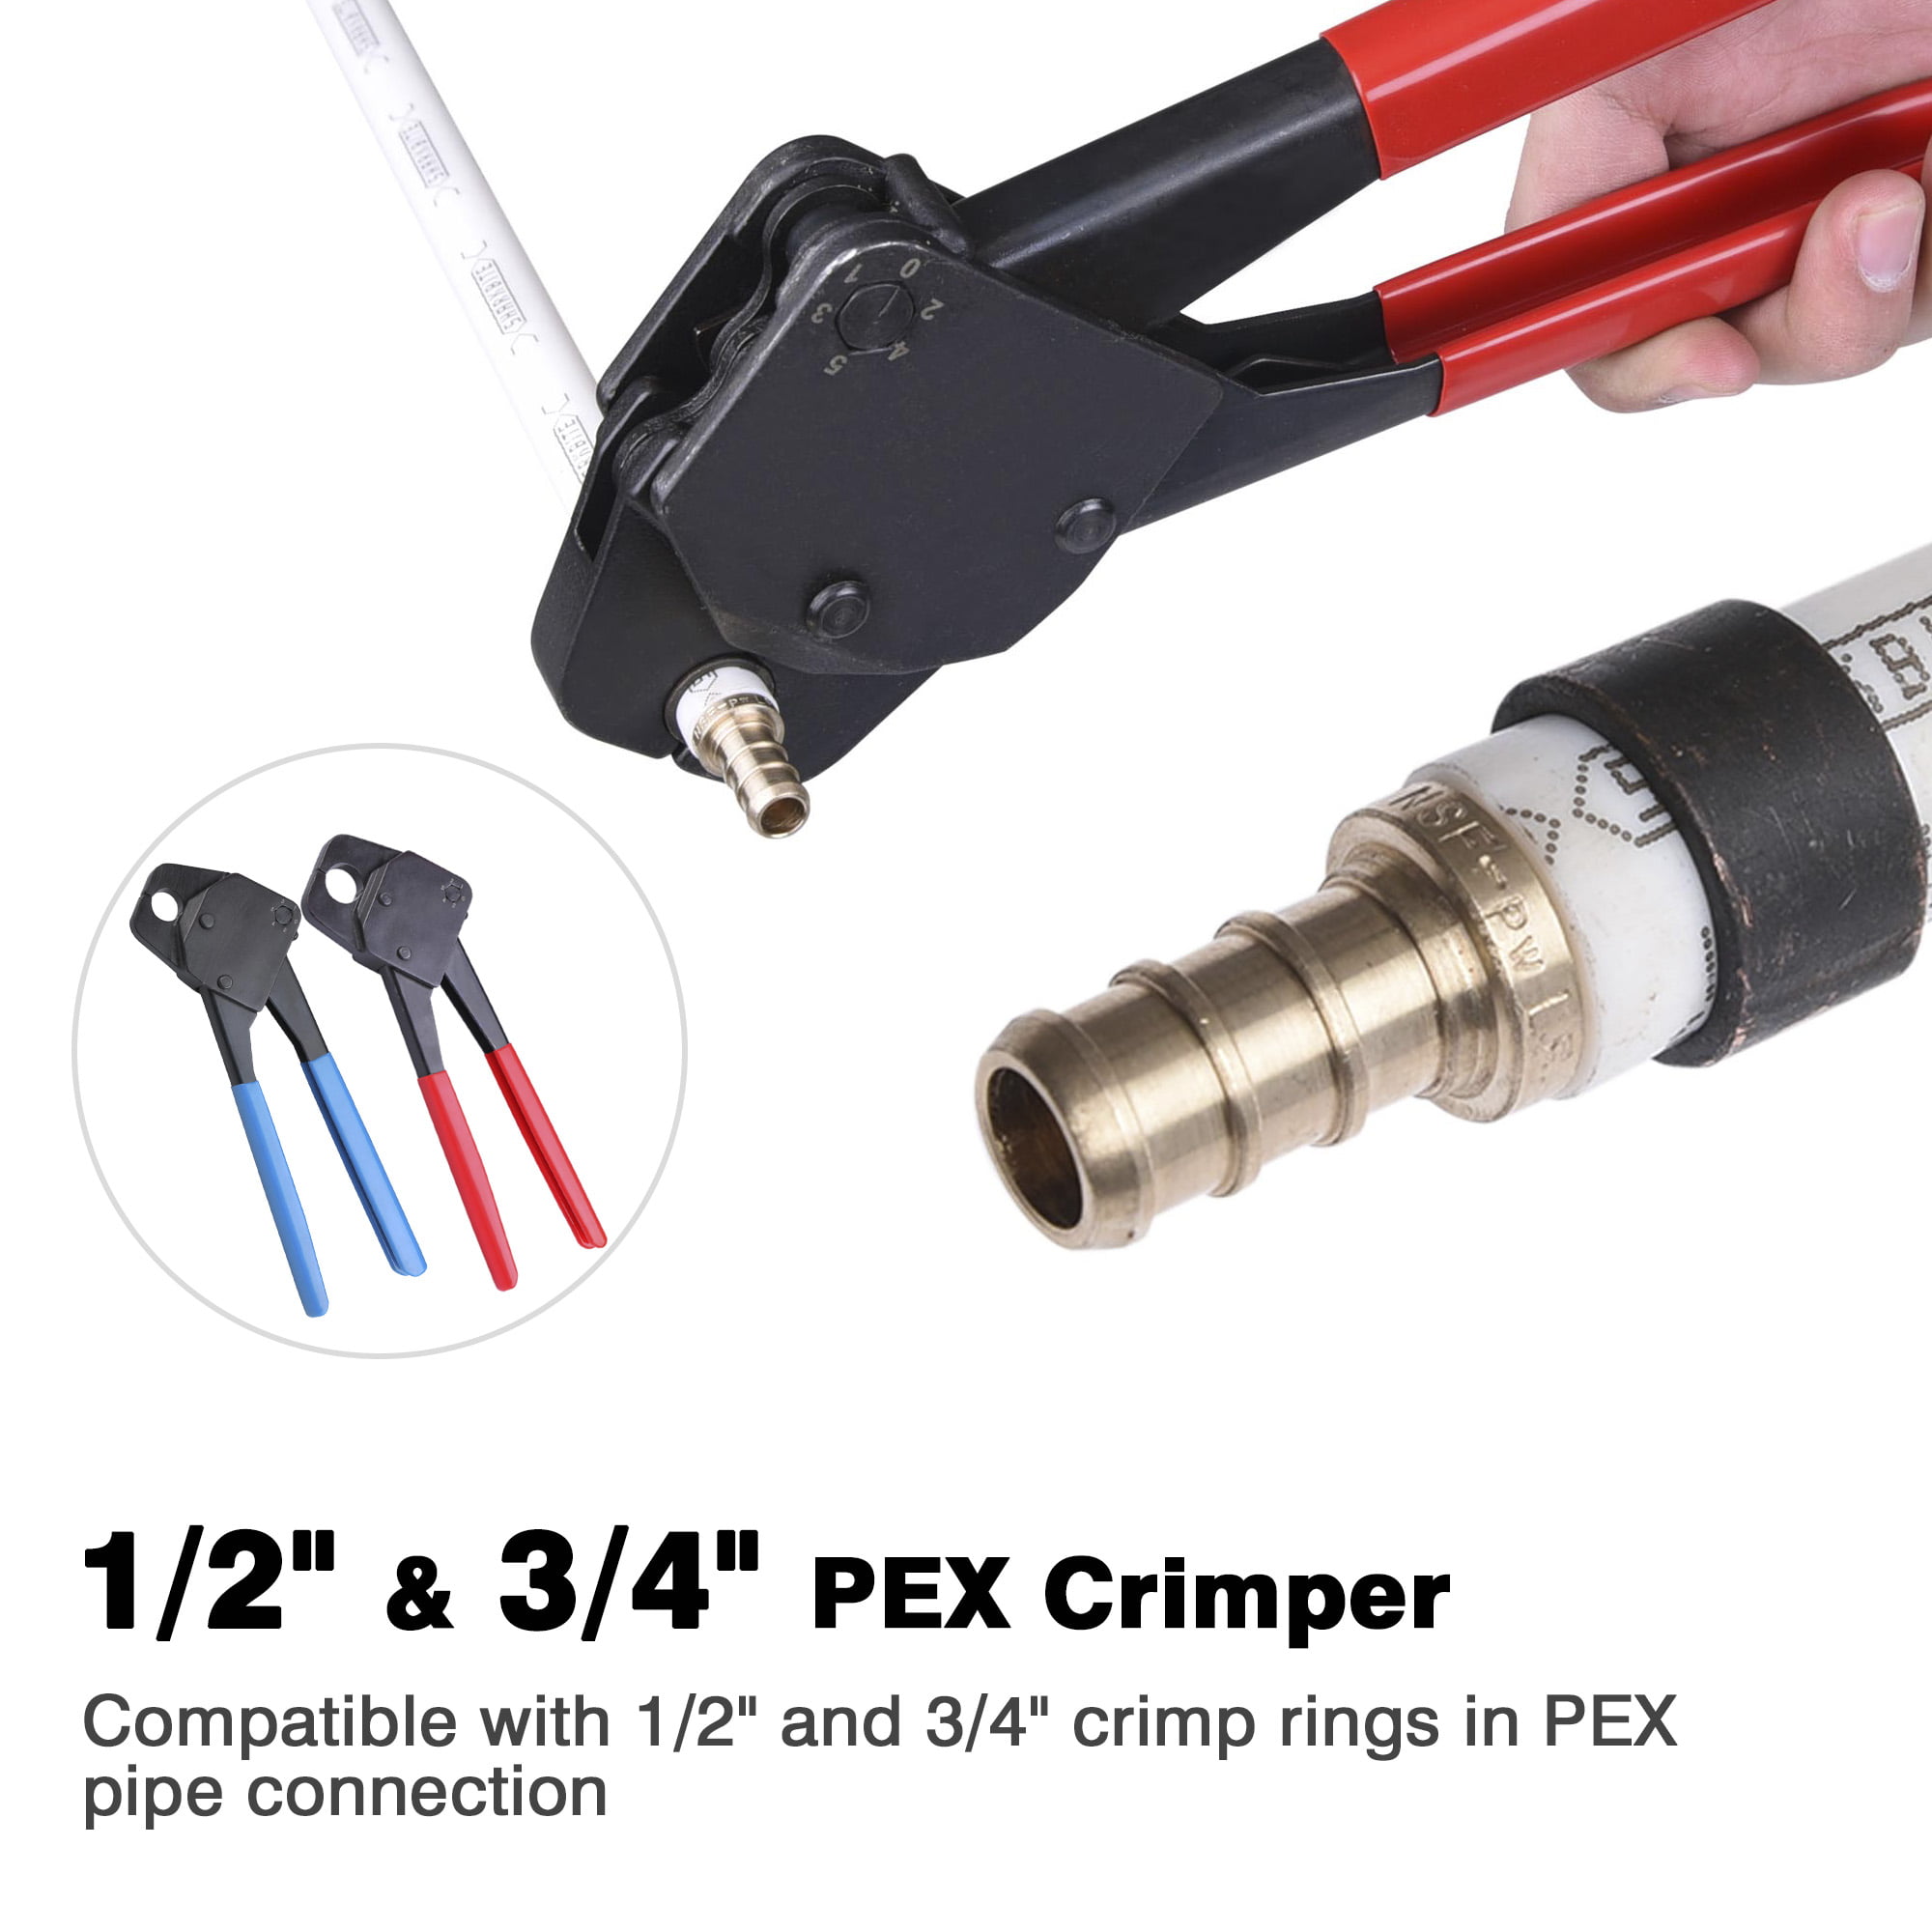 pvc cutter 2 Pex Crimpers for 1/2 & 3/4 copper ring pluming pipe crimping Tool